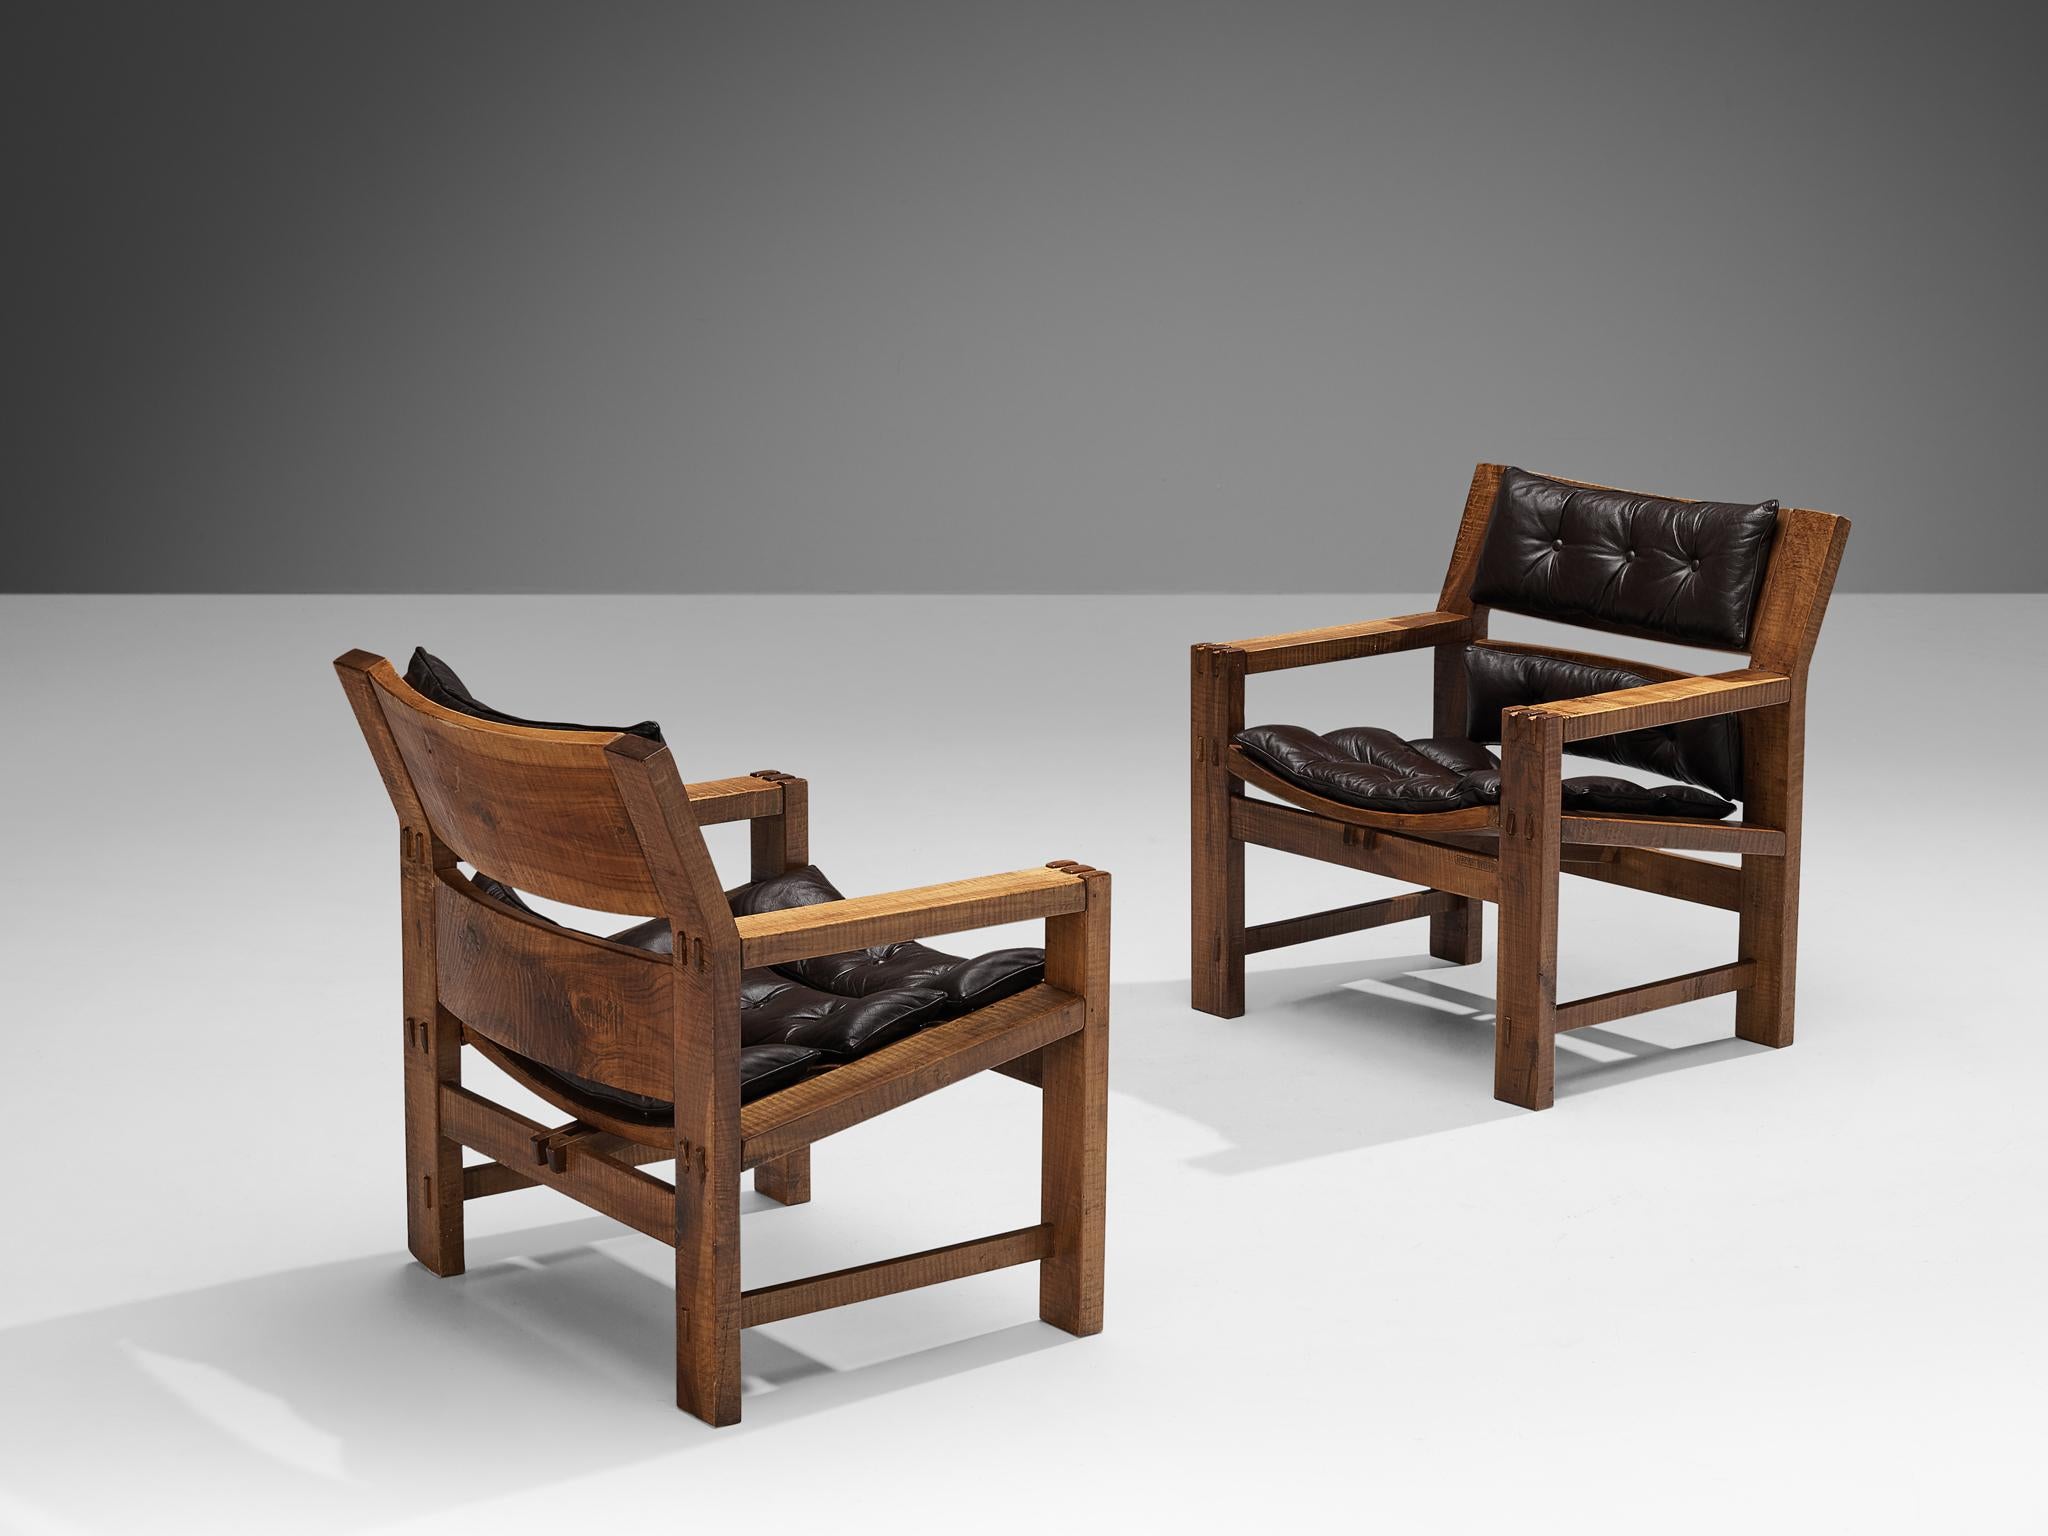 Giuseppe Rivadossi for Officina Rivadossi, pair of lounge chairs, walnut, leather, Italy, 1980s

A beautiful set of lounge chairs by the Italian sculptor and designer Giuseppe Rivadossi, featuring a high level of craftsmanship in woodwork. The